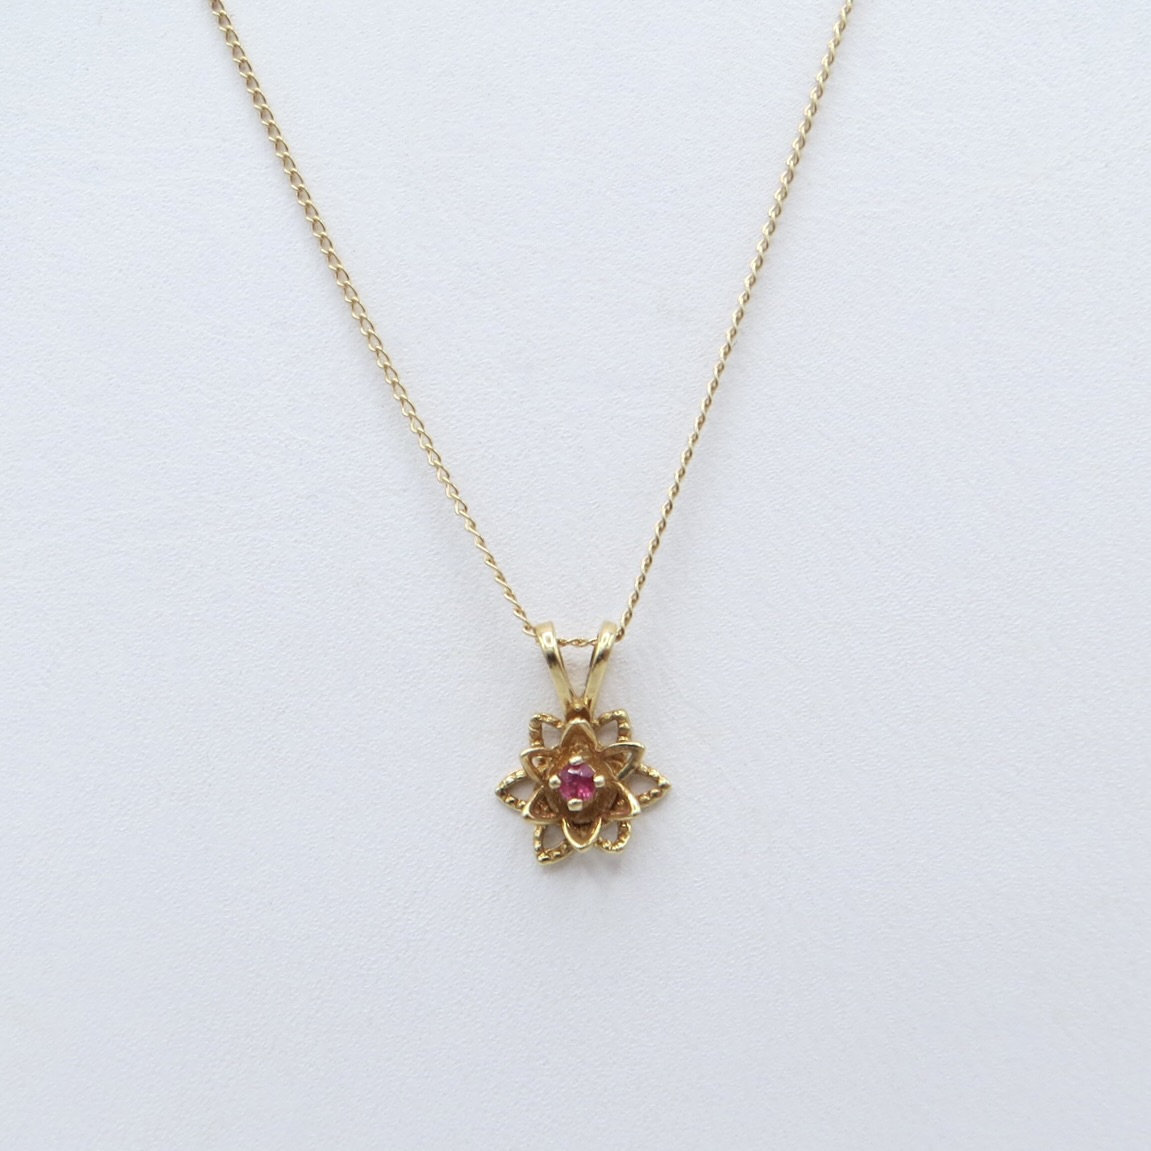 Dainty 14kt Gold and Ruby Necklace